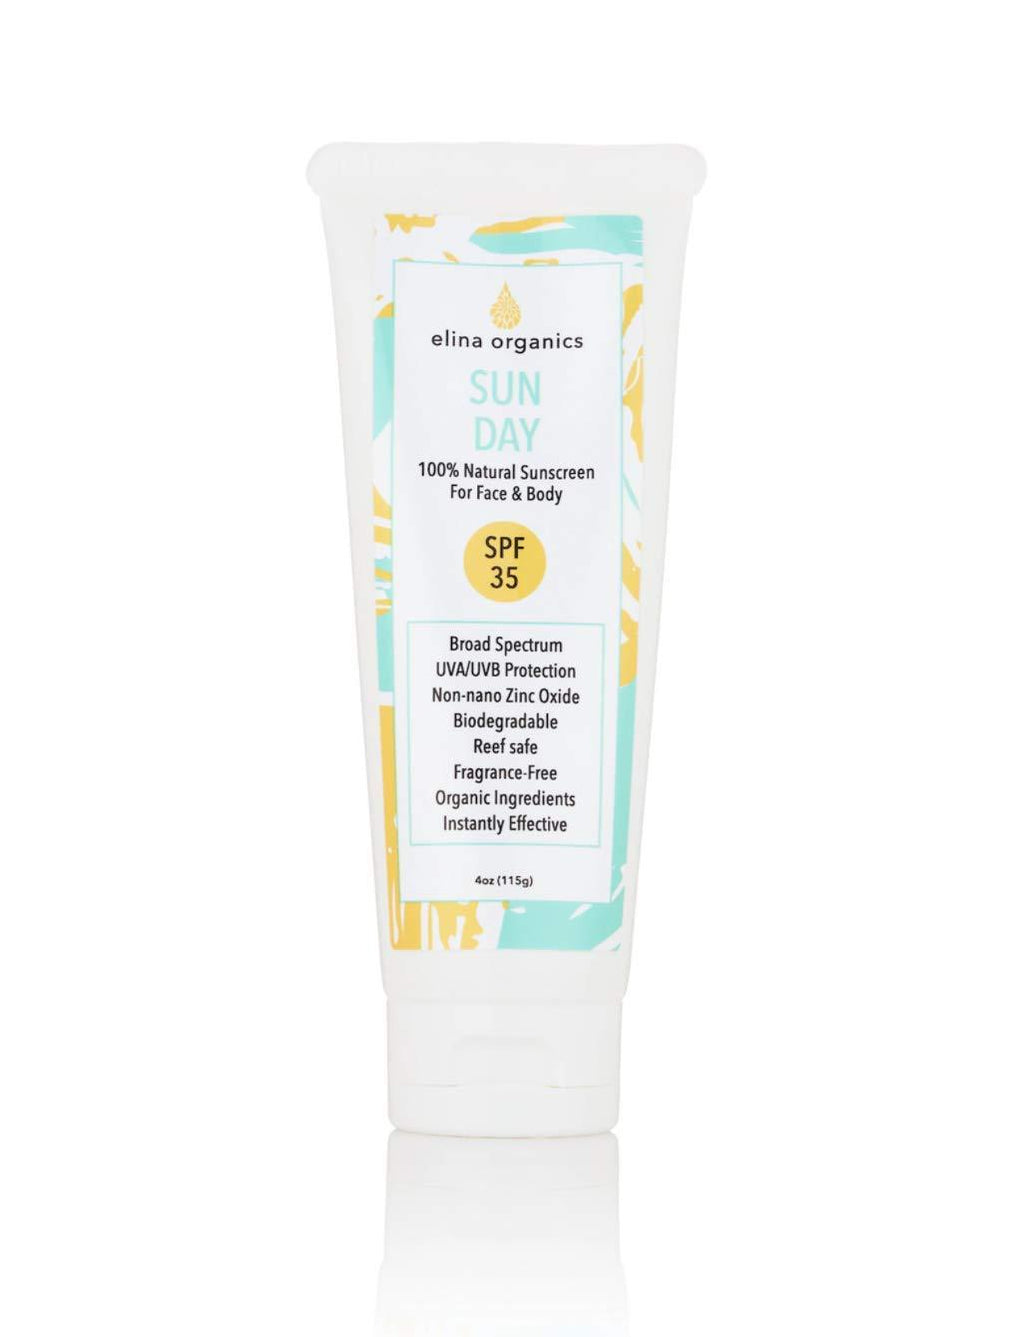 Sun Day Sunscreen, 4oz, UVA/UVB Protection, Non-nano 25% Zinc Oxide, Broad Spectrum, Reef Safe, SPF 35, Organic Ingredients, Biodegradable, Sun Protection, Non-Greasy Protection, Fast Absorbing, Moisturizing, All Natural - BeesActive Australia